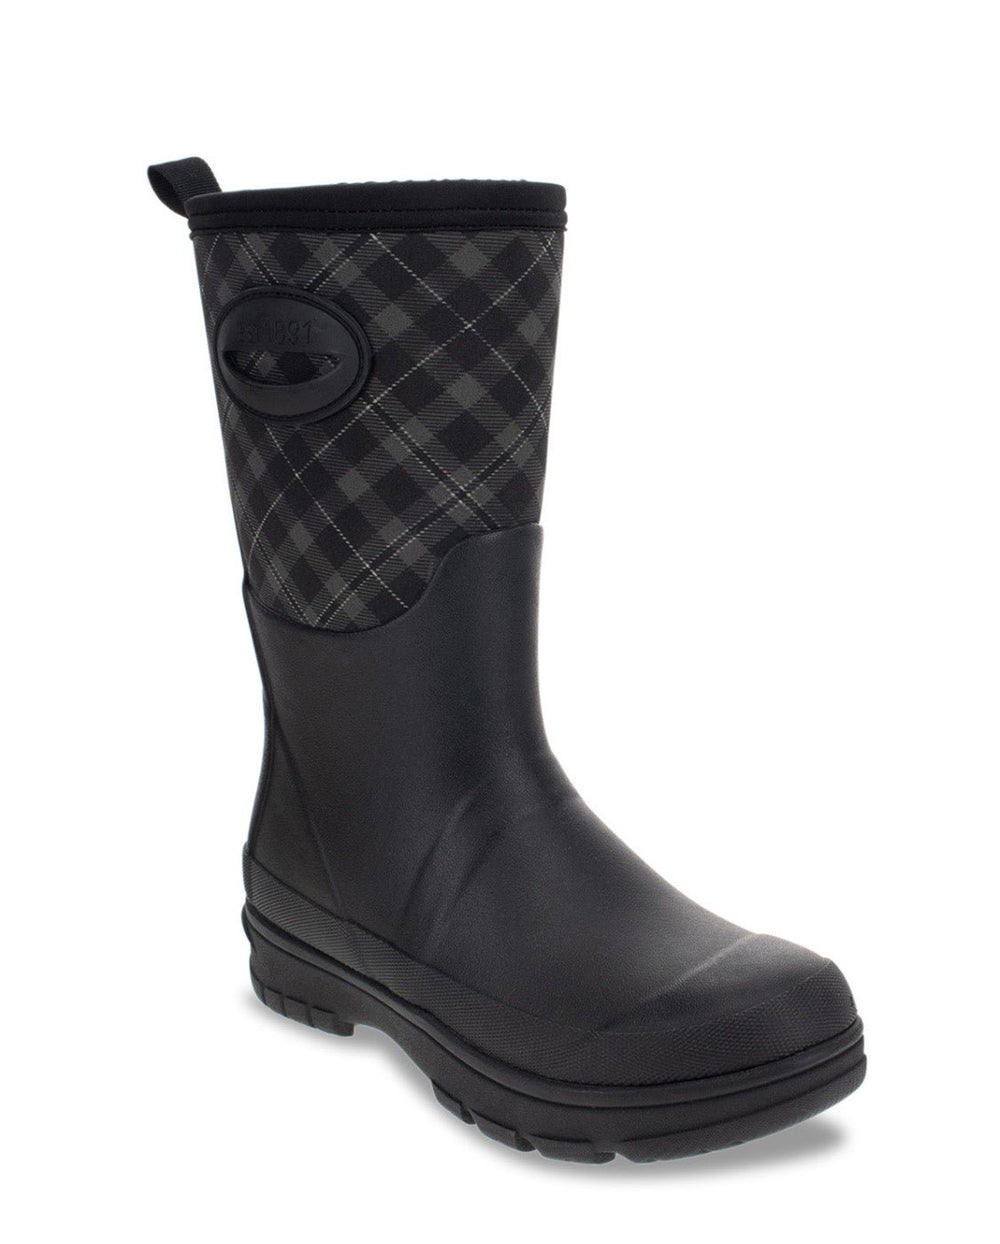 Women's Plaid Neoprene Mid Cold Weather Boot - Black - Western Chief